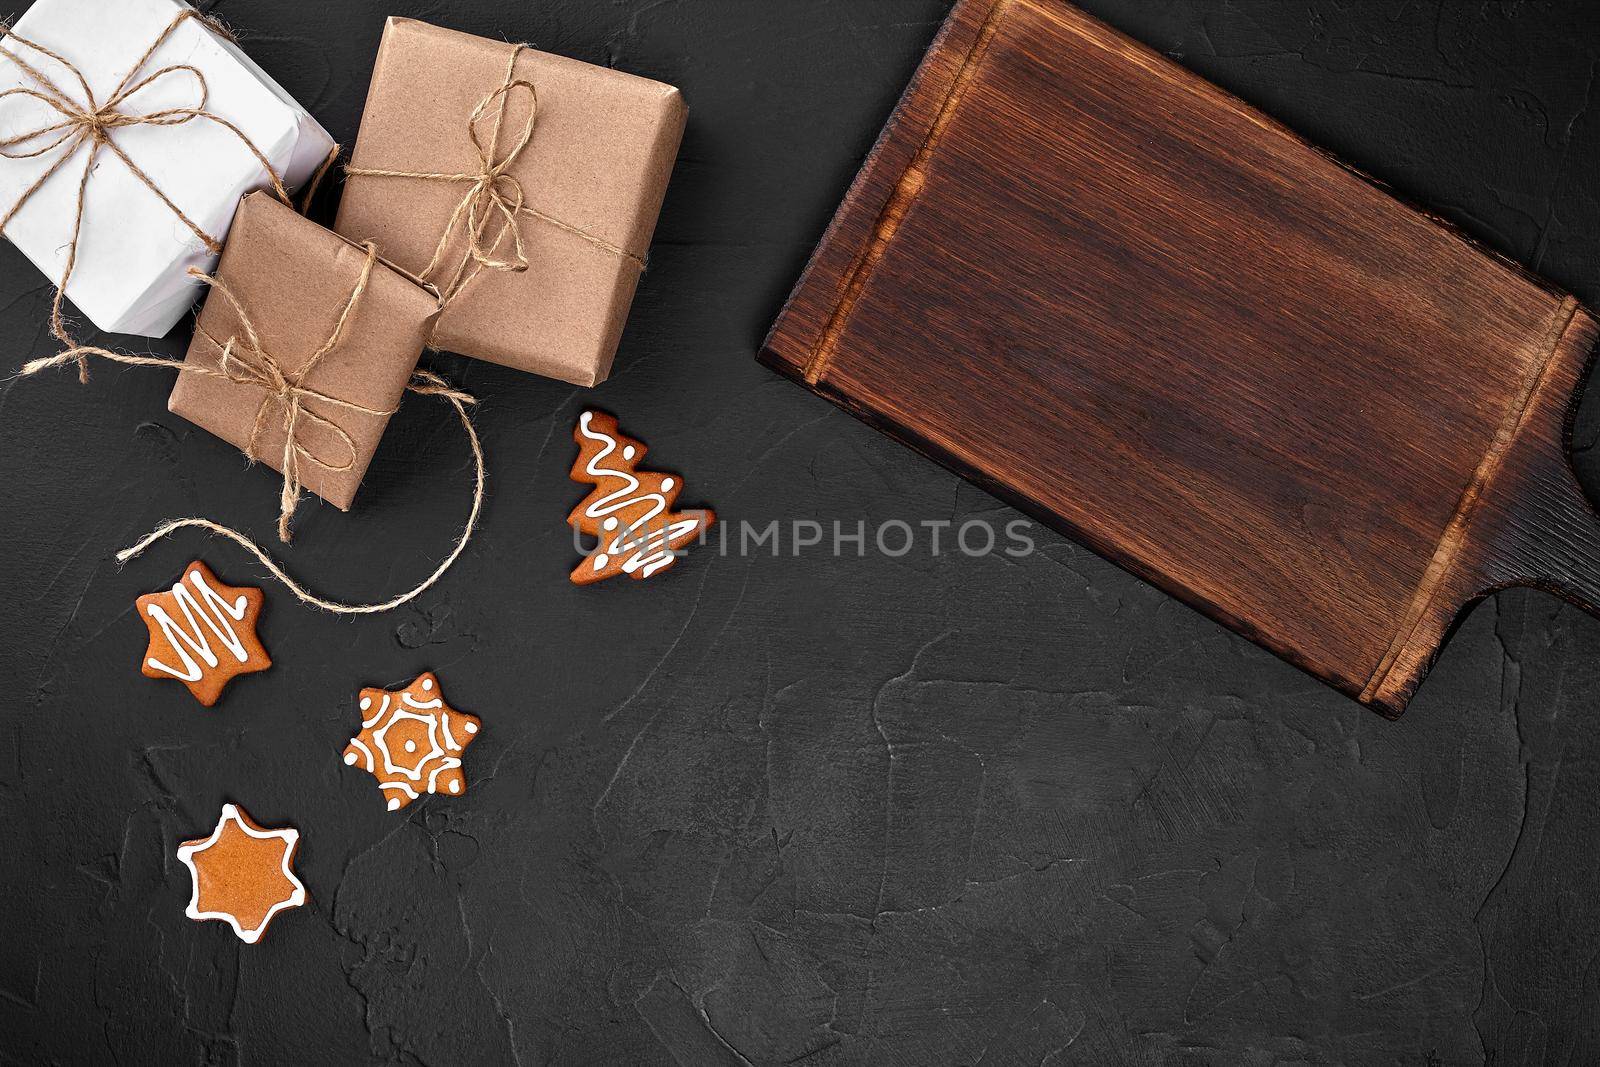 Christmas composition. Xmas cookies, gifts, festive decoration on black background. Flat lay, top view, with copy space. Close Up